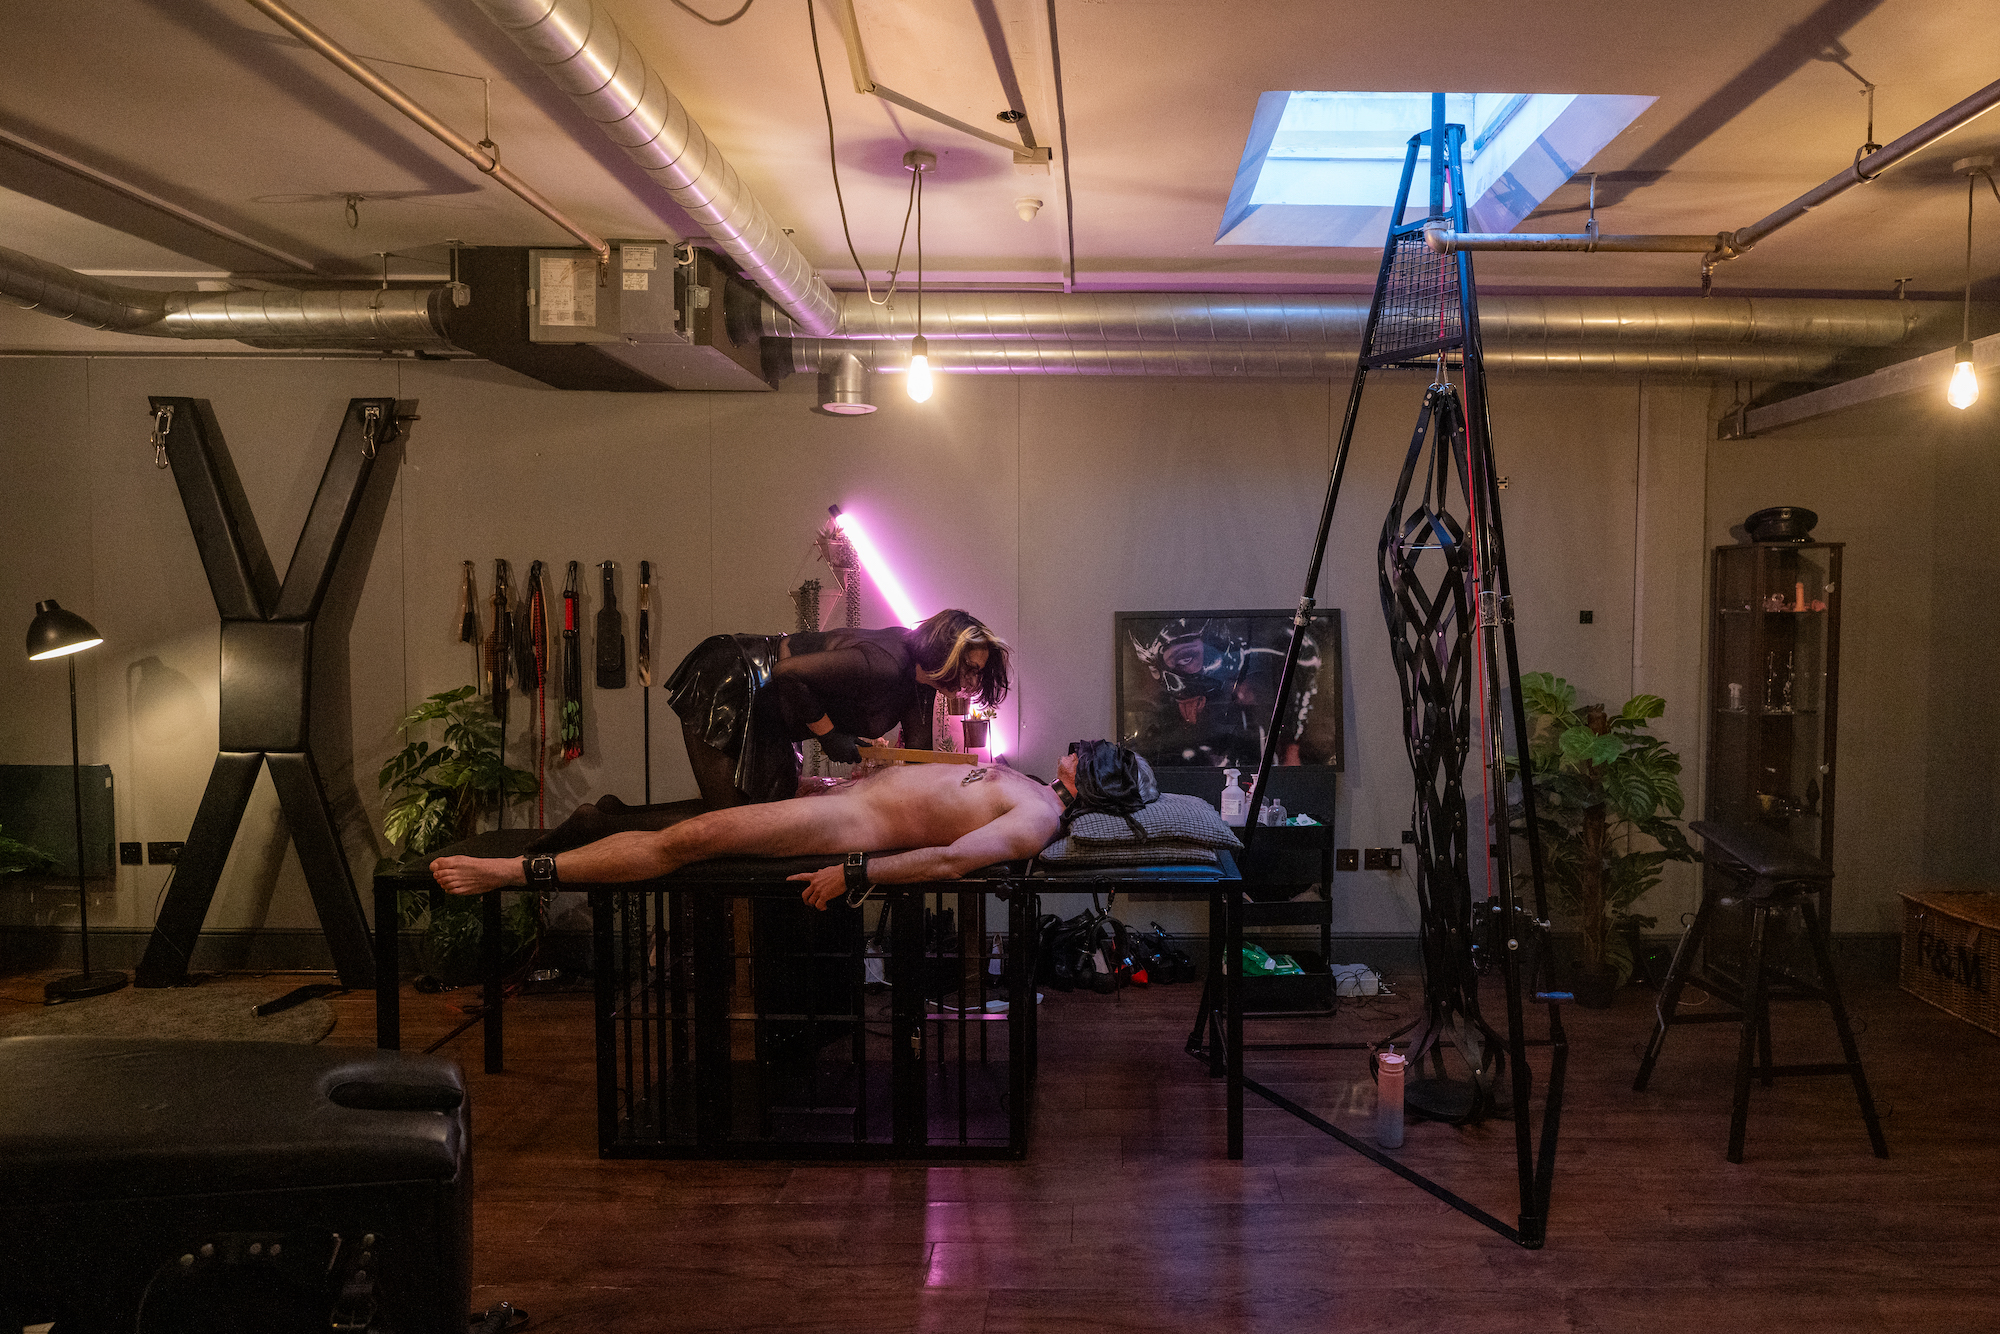 Dominatrix Countess Diamond leaning over a naked male sub in a dungeon